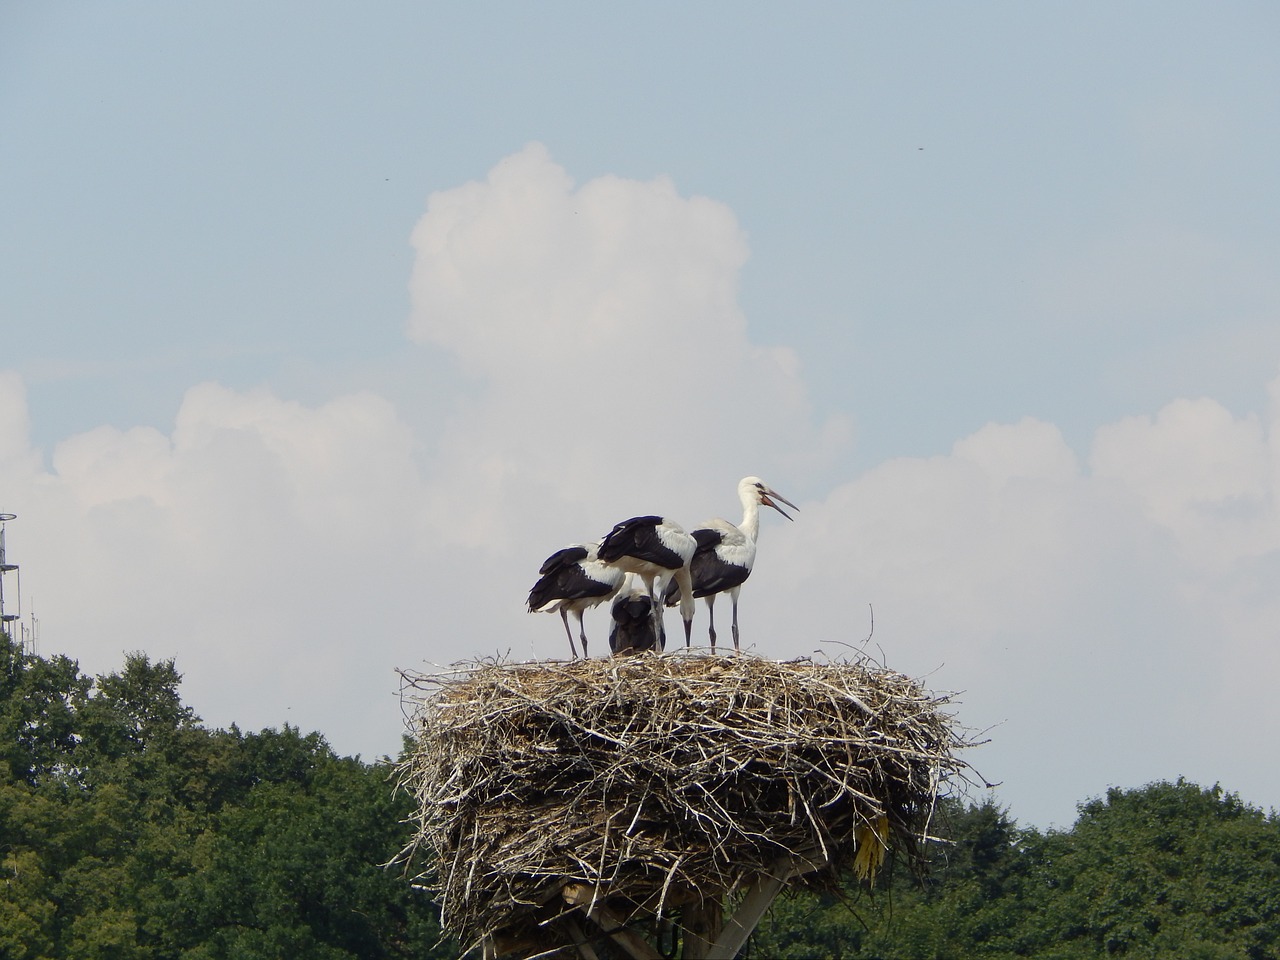 storks birds young free photo